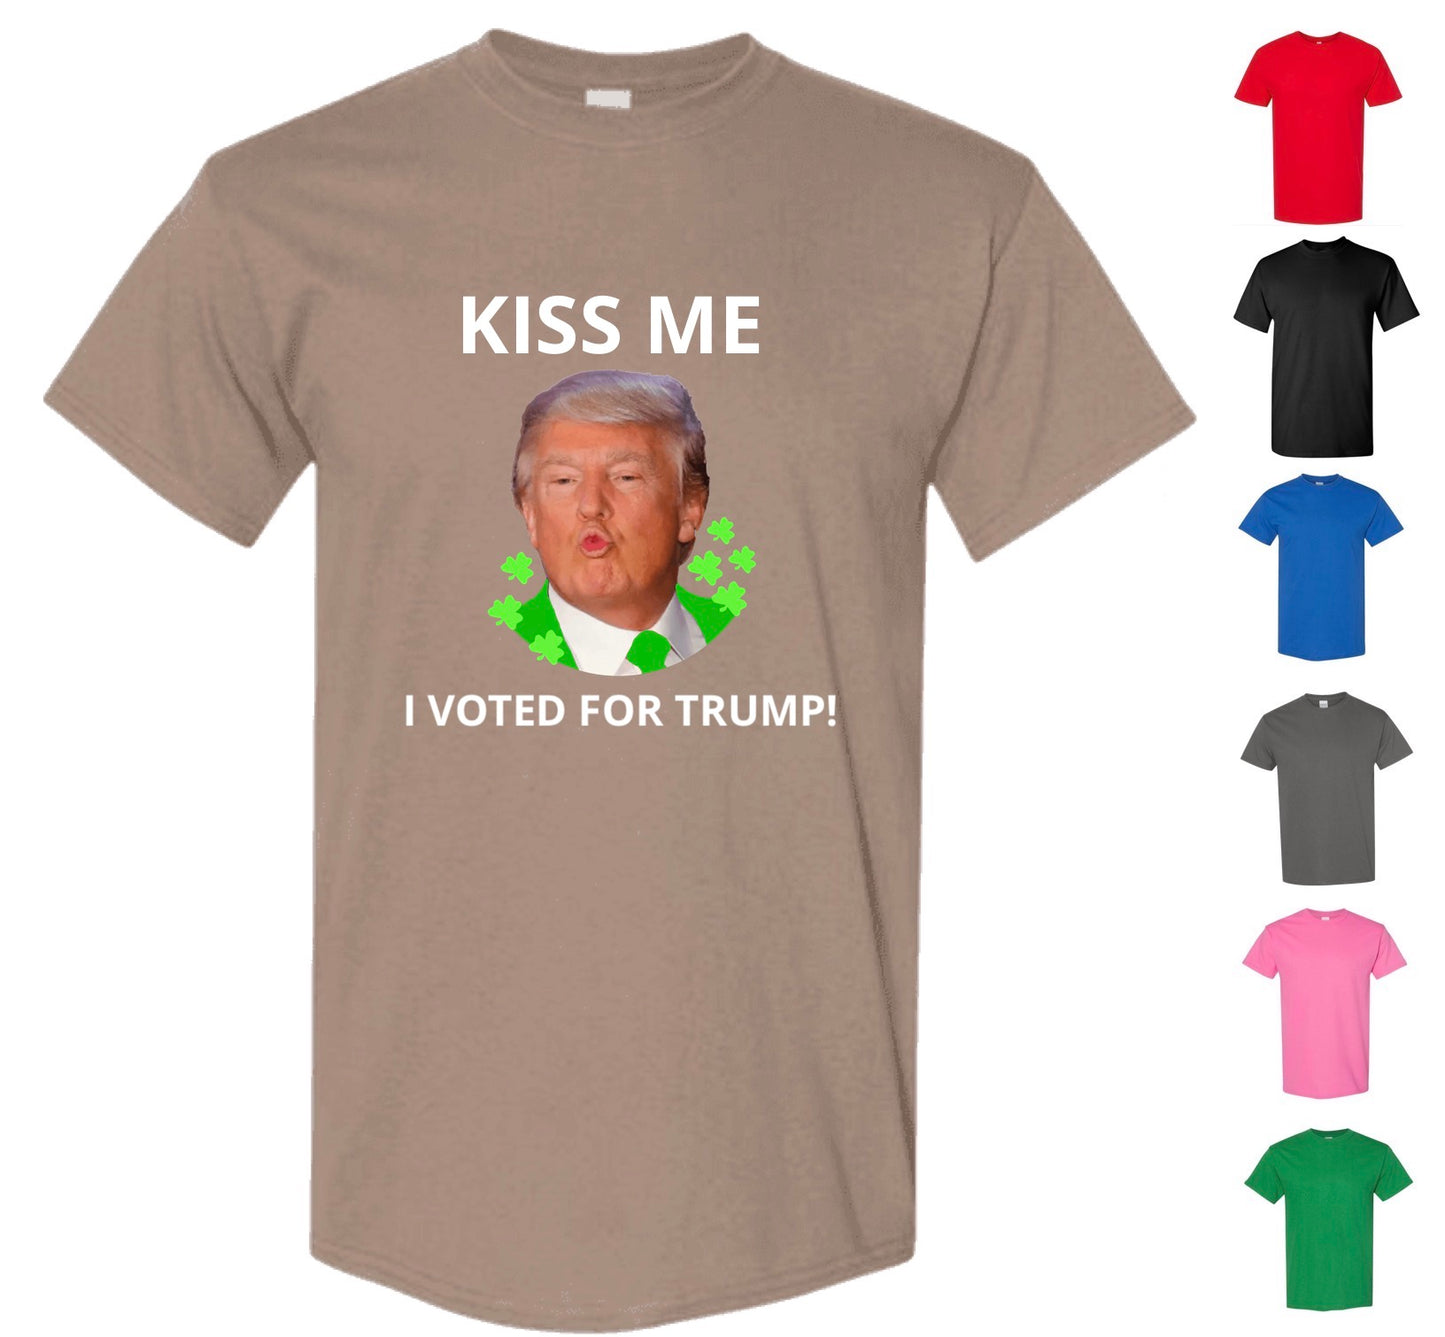 Kiss Me, I Voted For Trump T-Shirt (FREE Shipping)